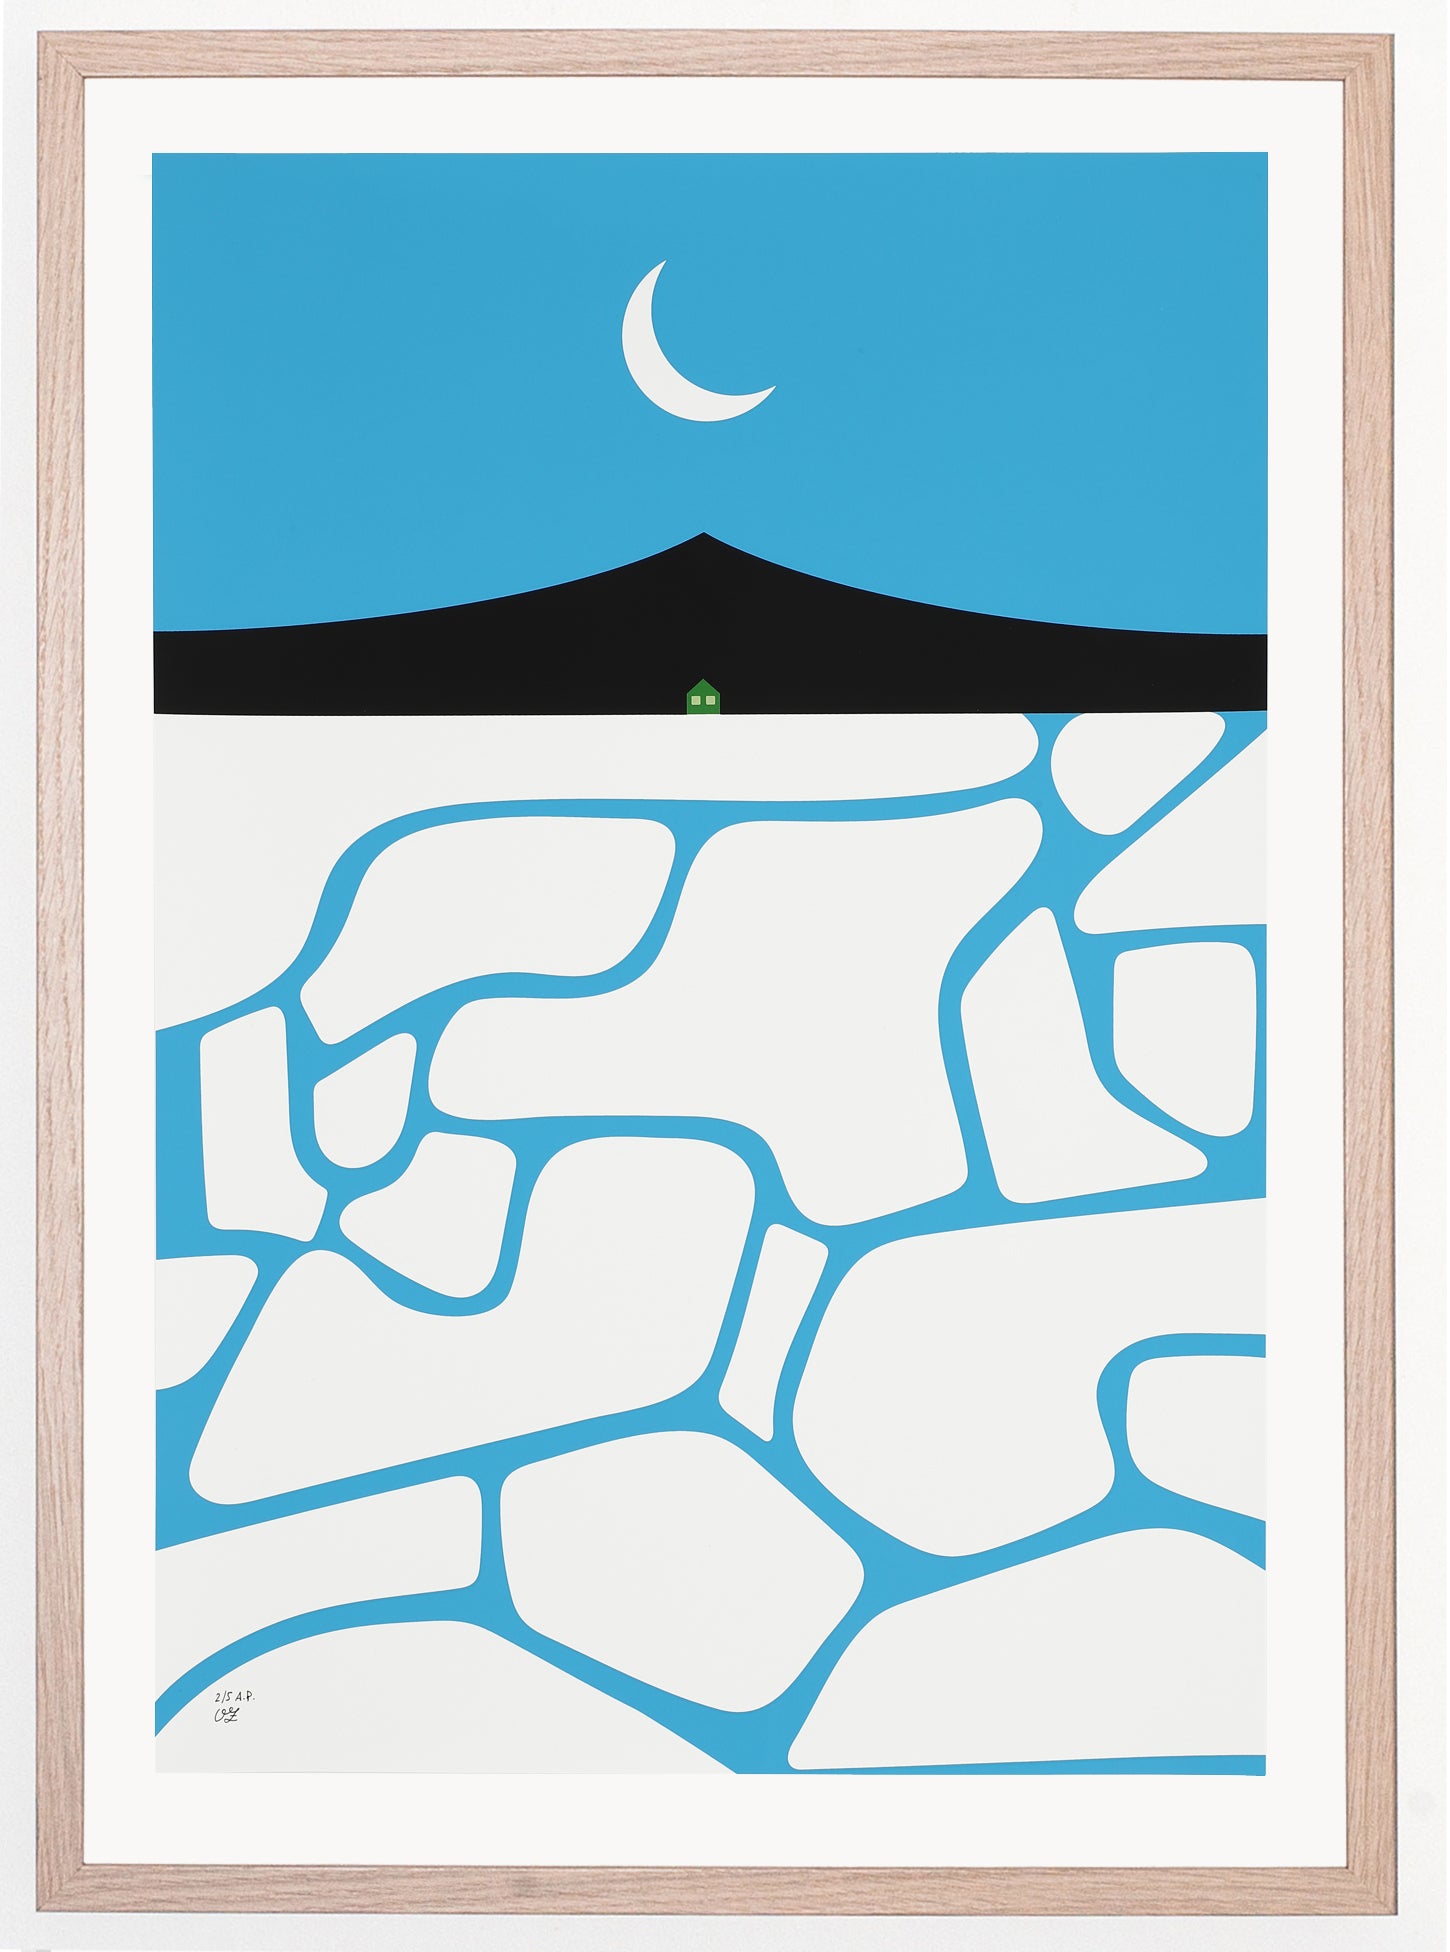 Limited edition print by Olimpia Zagnoli for The Jaunt of a desert landscape with a tiny green house in front of a black mountain with a crescent moon above in a light blue sky. 